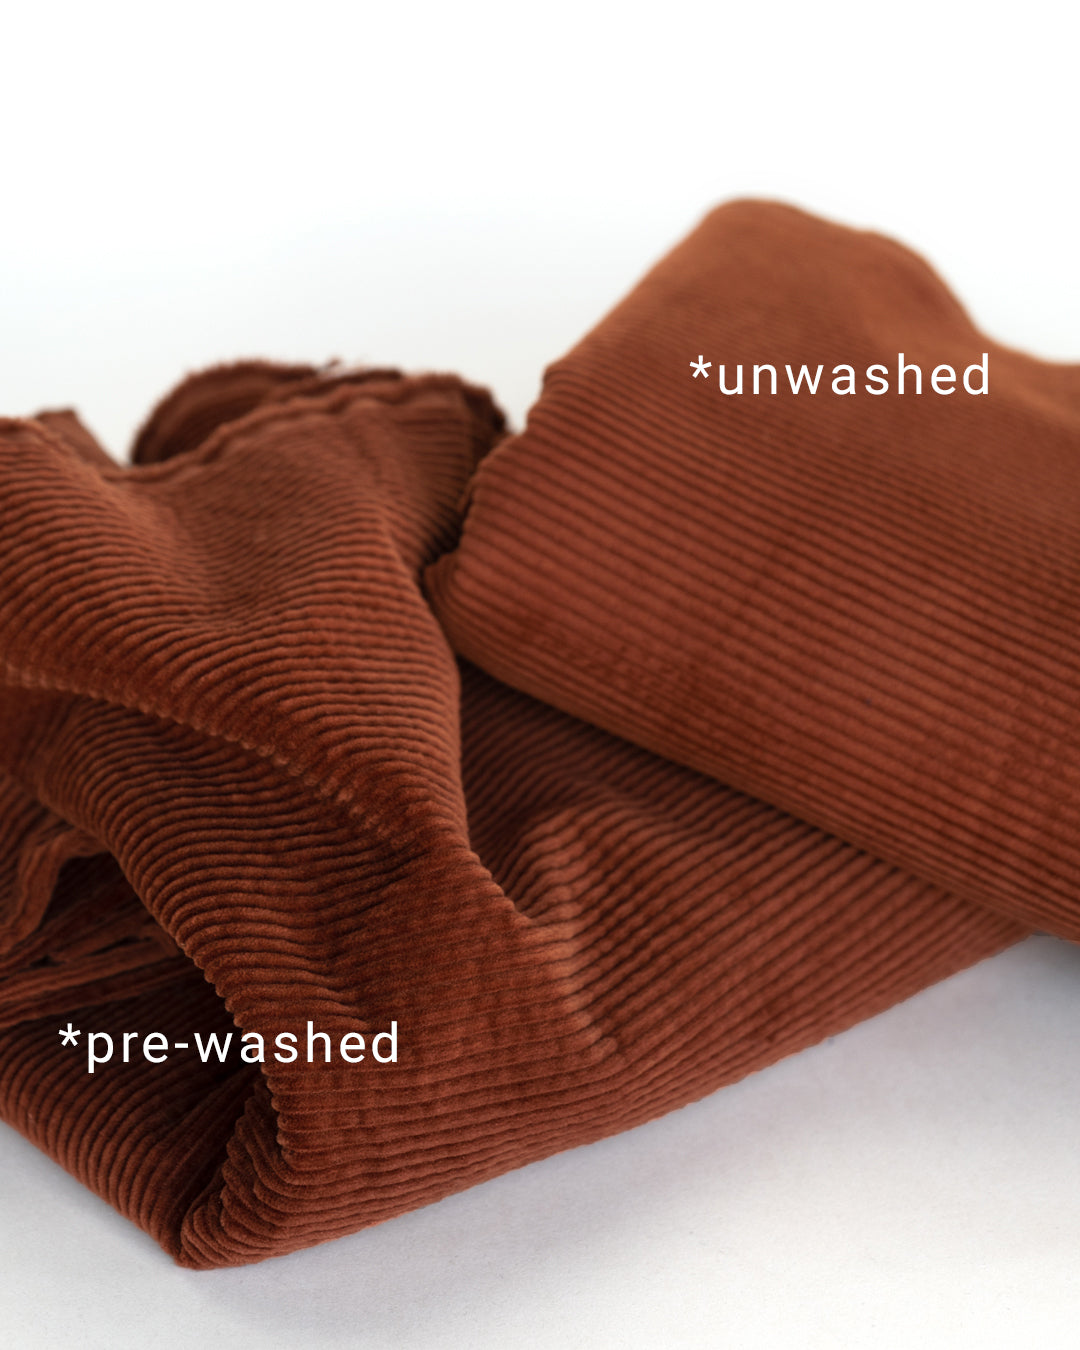 Rumpled washed cotton corduroy and unwashed cotton corduroy